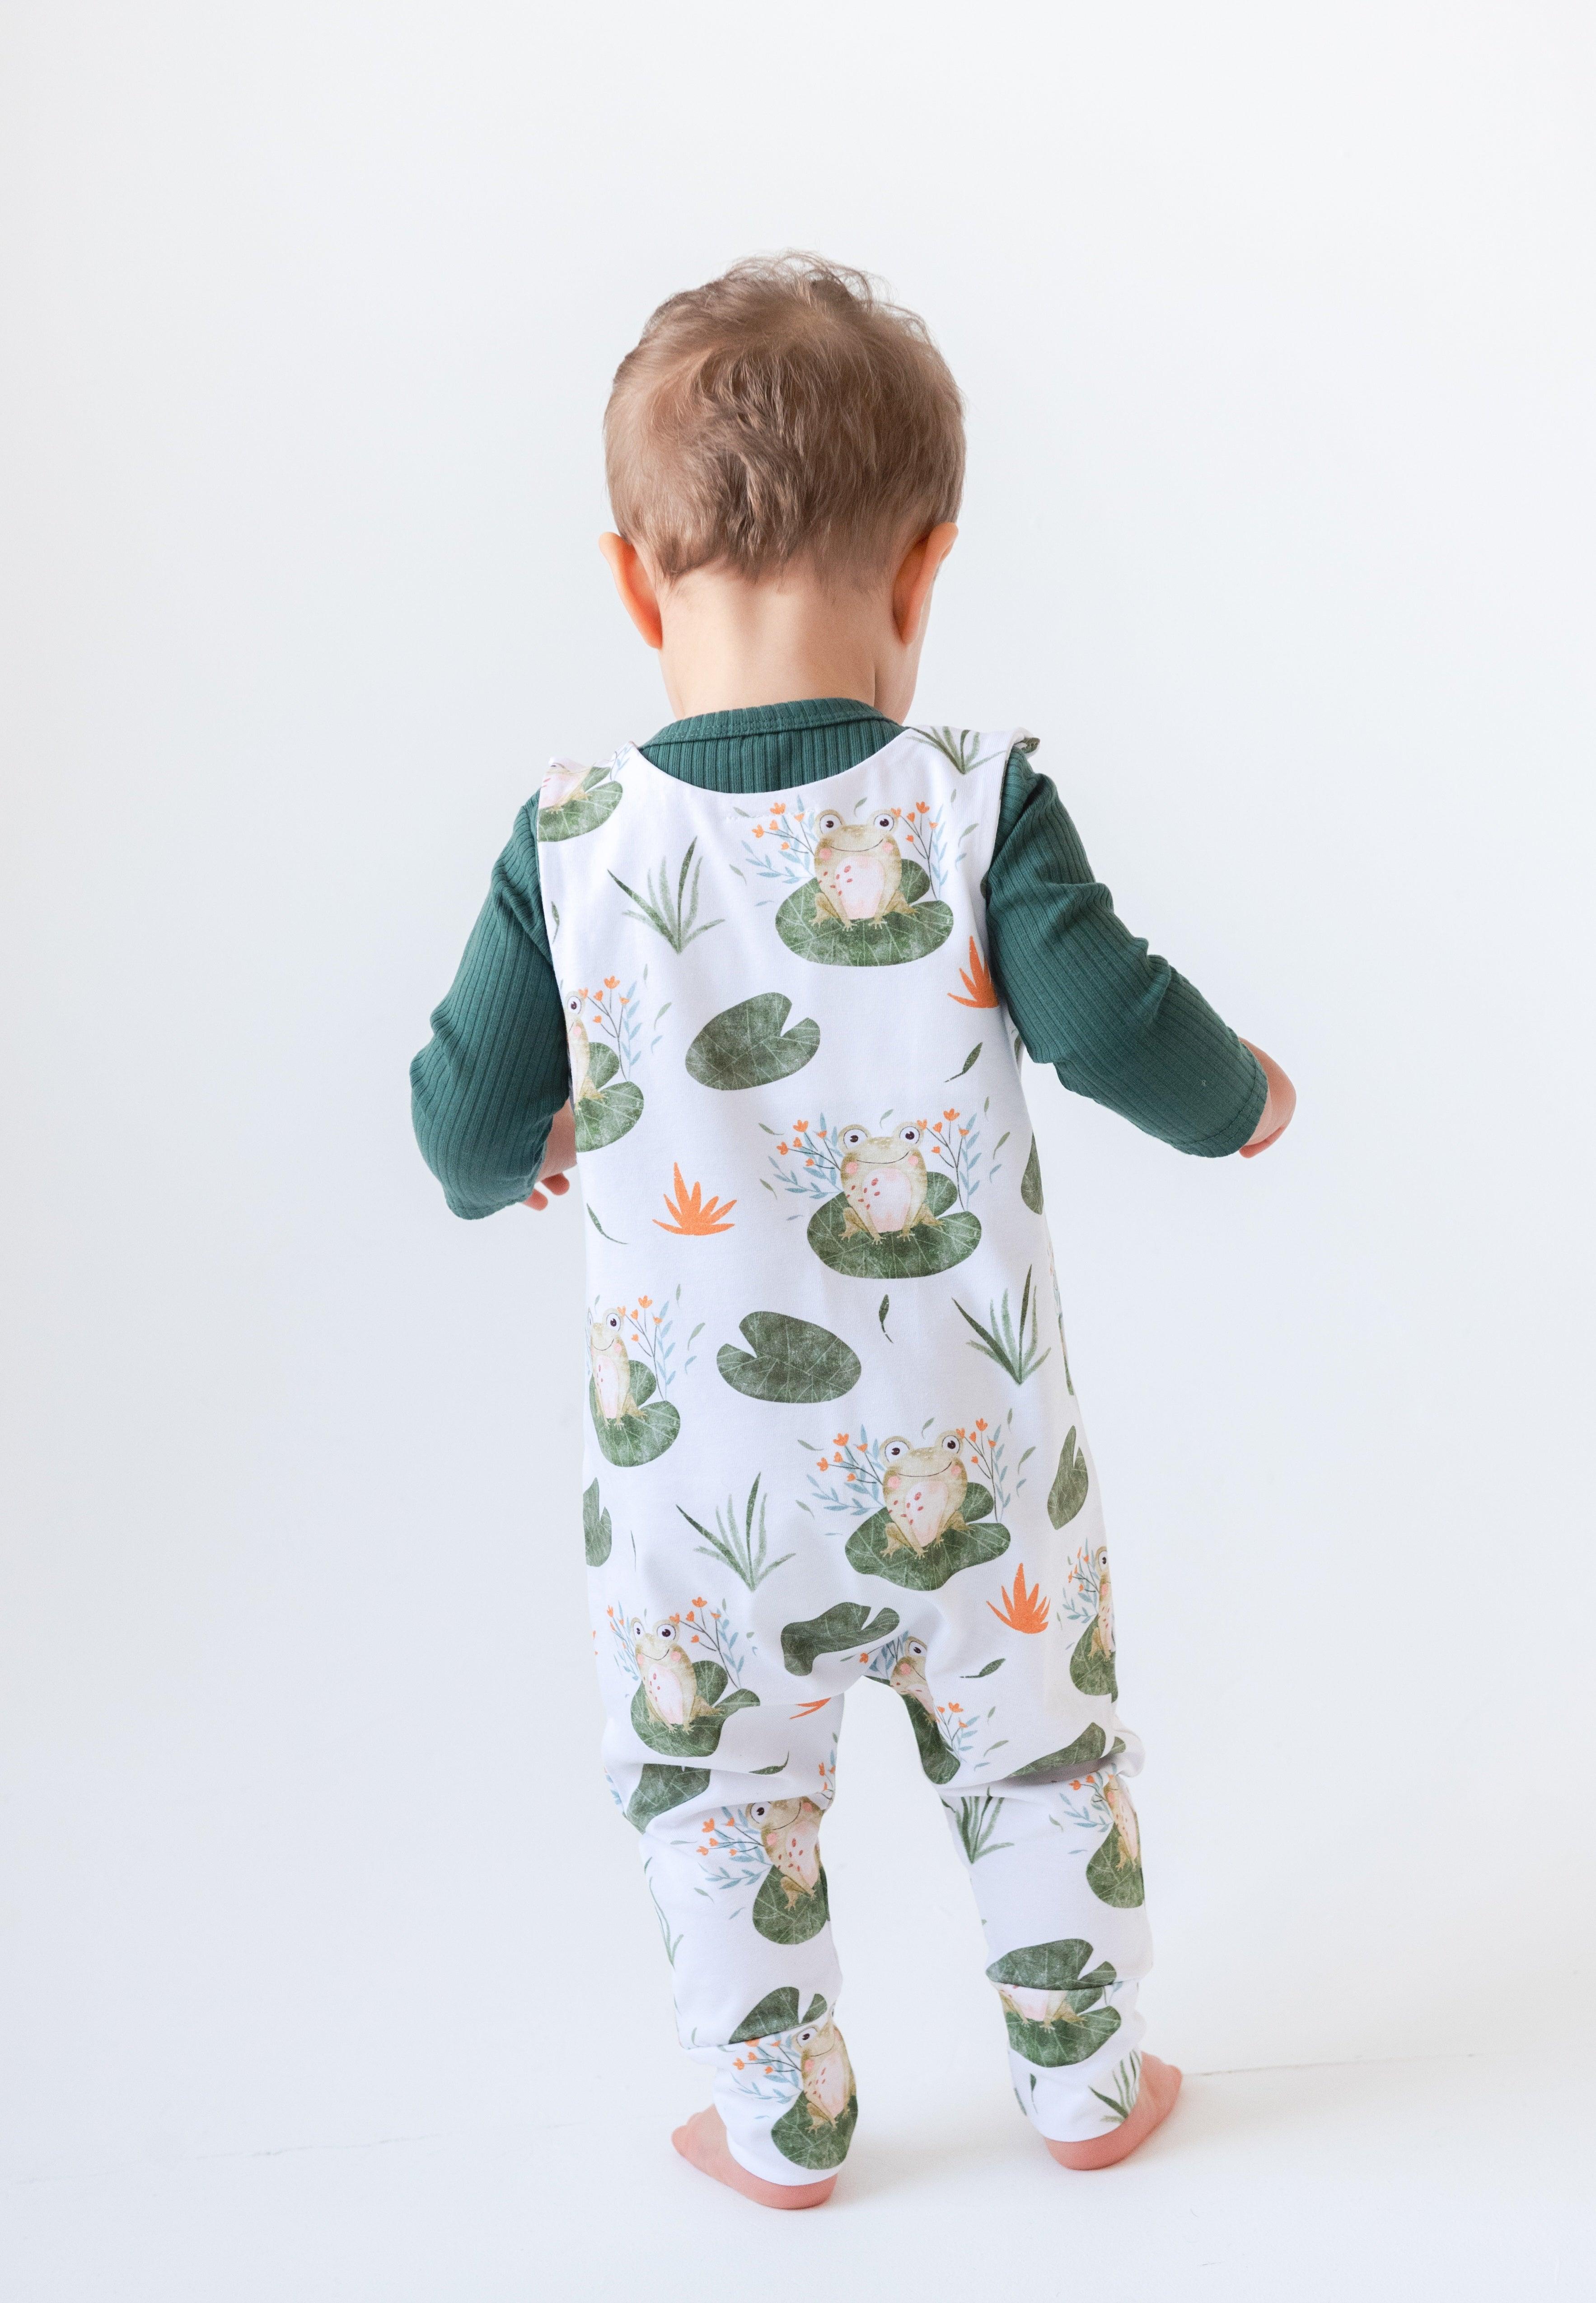 files/lily-pad-frog-dungaree-romper-claybearofficial-5.jpg